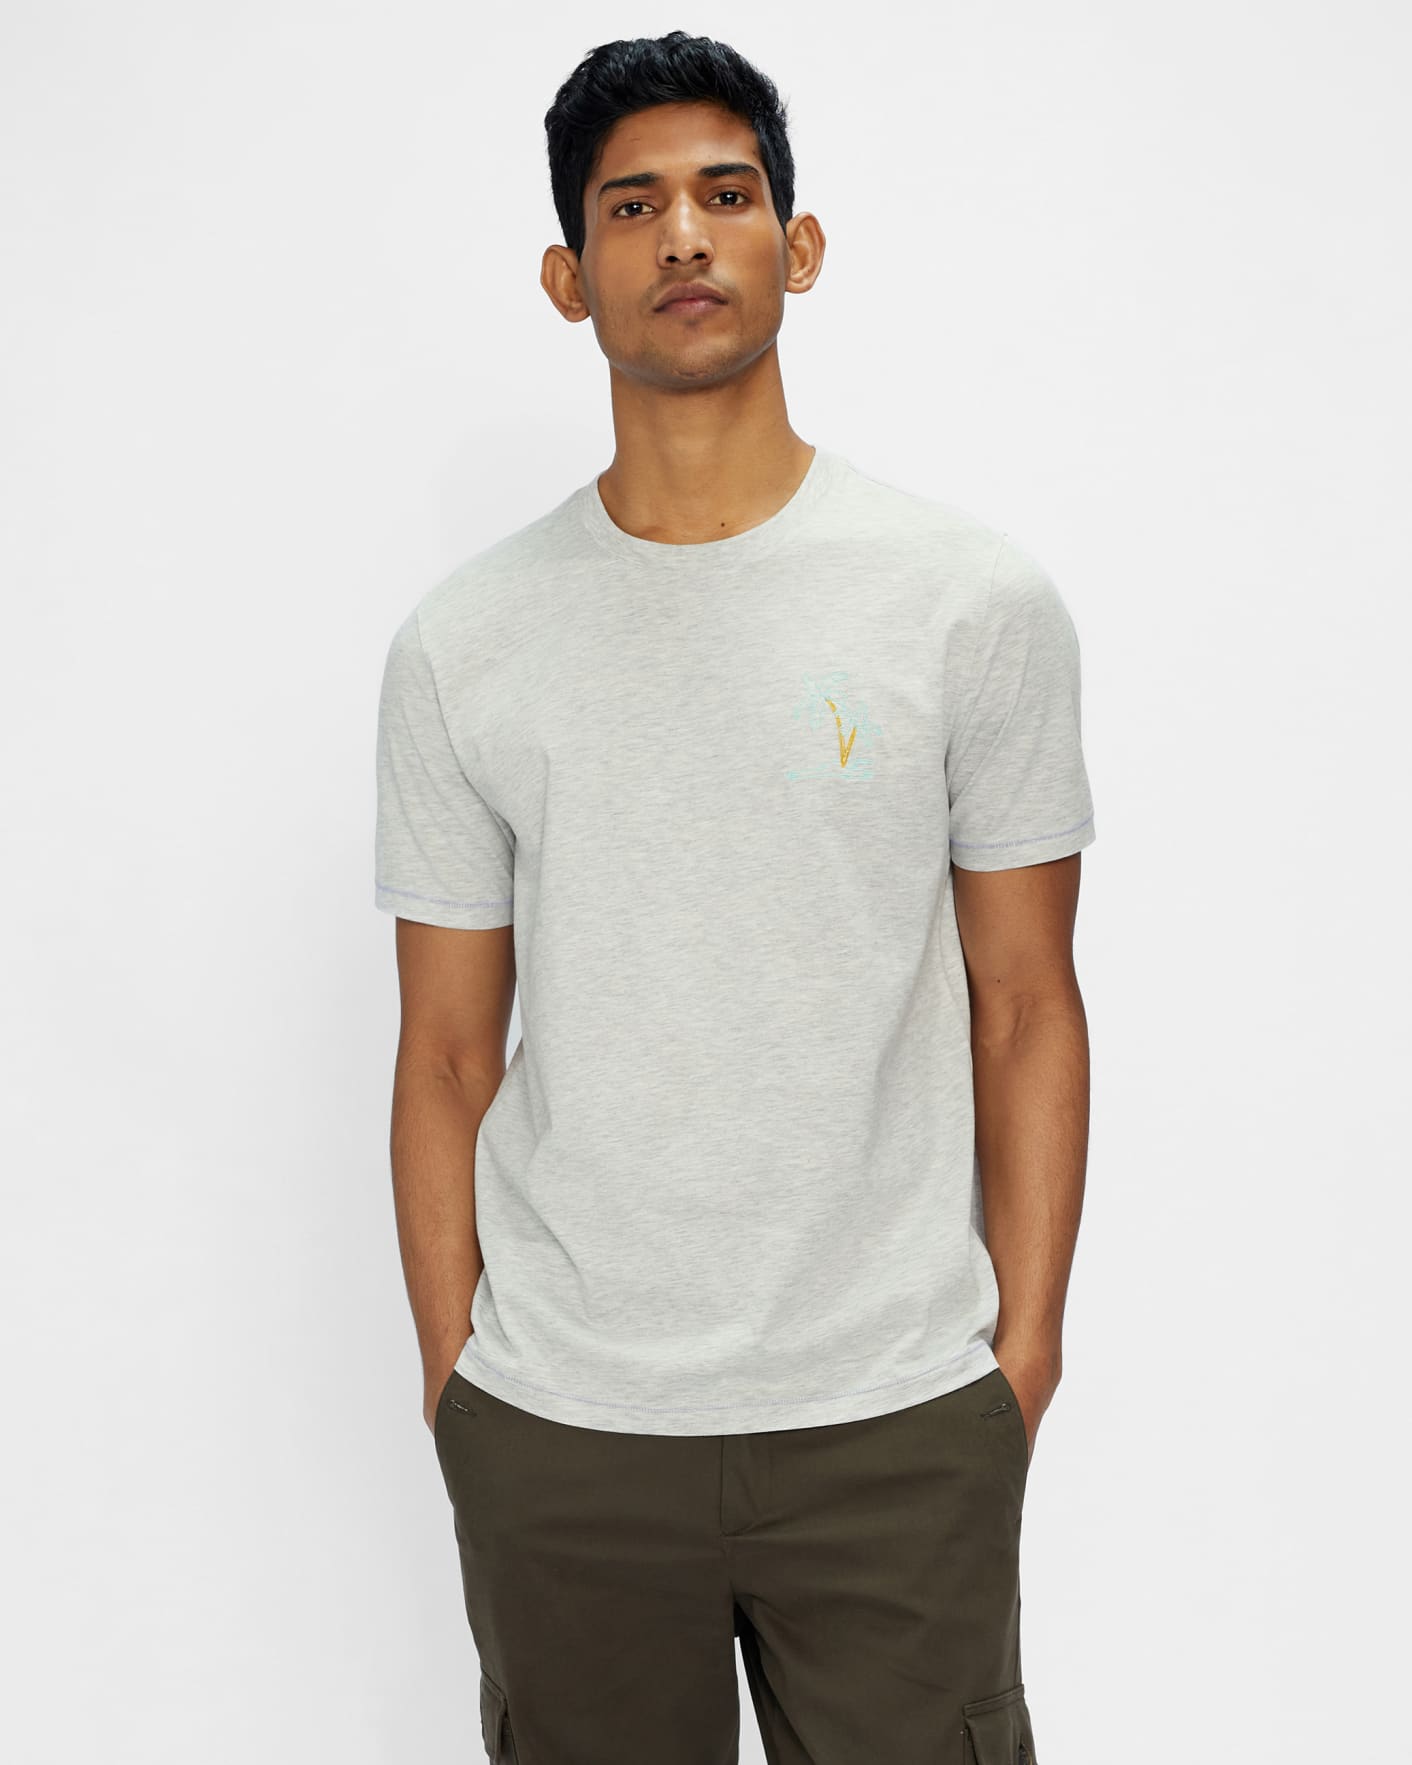 Grey-Marl Short Sleeve Palm Tree Graphic T Shirt Ted Baker